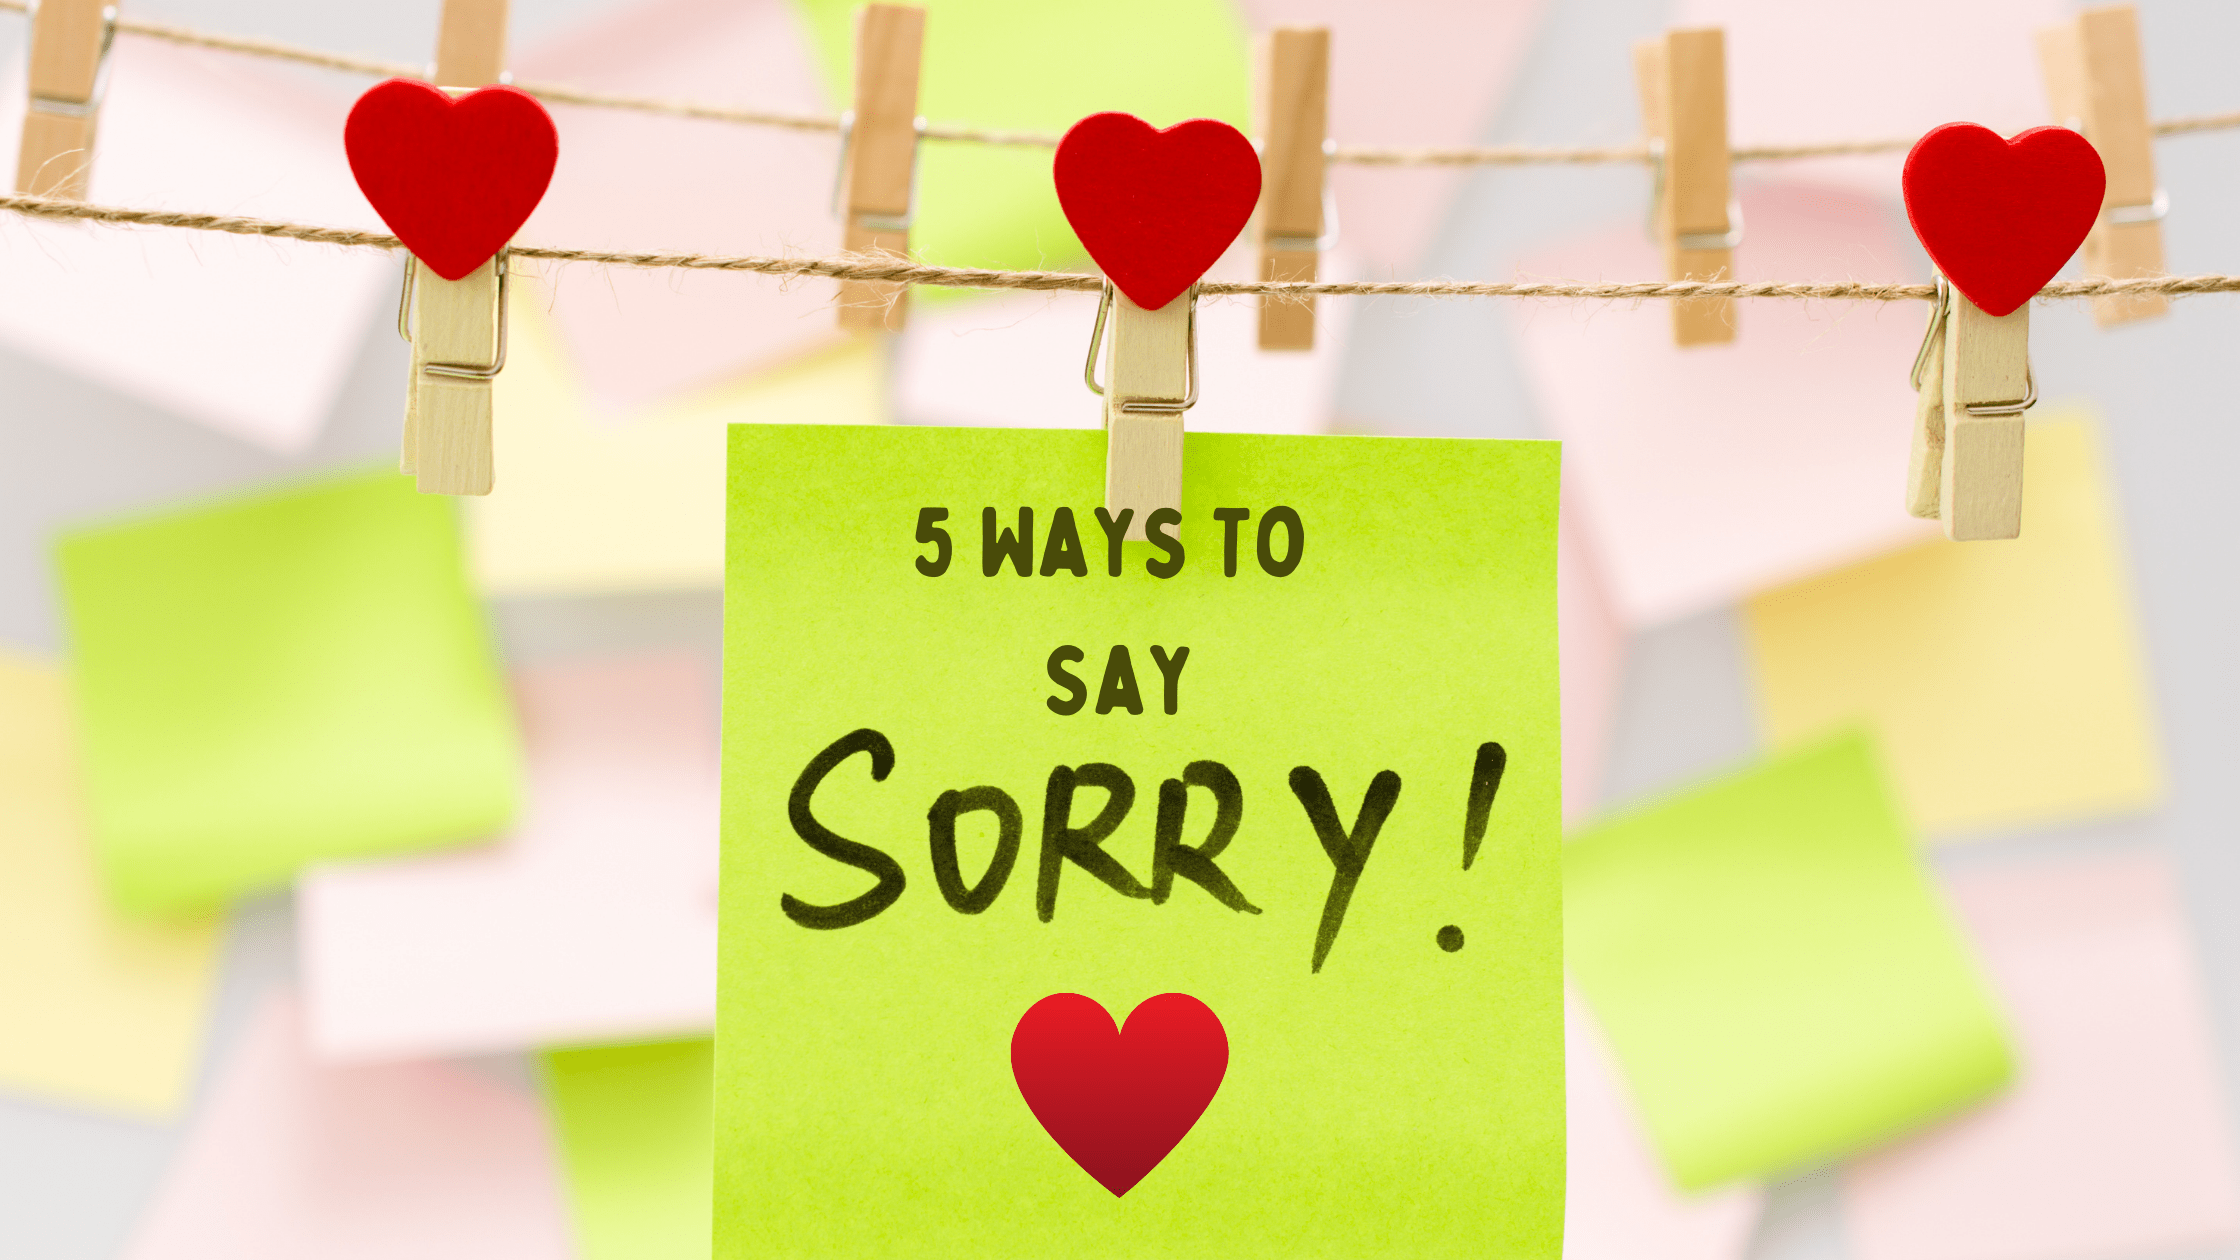 5 Cutest Ways Of Saying Sorry To Your Love!